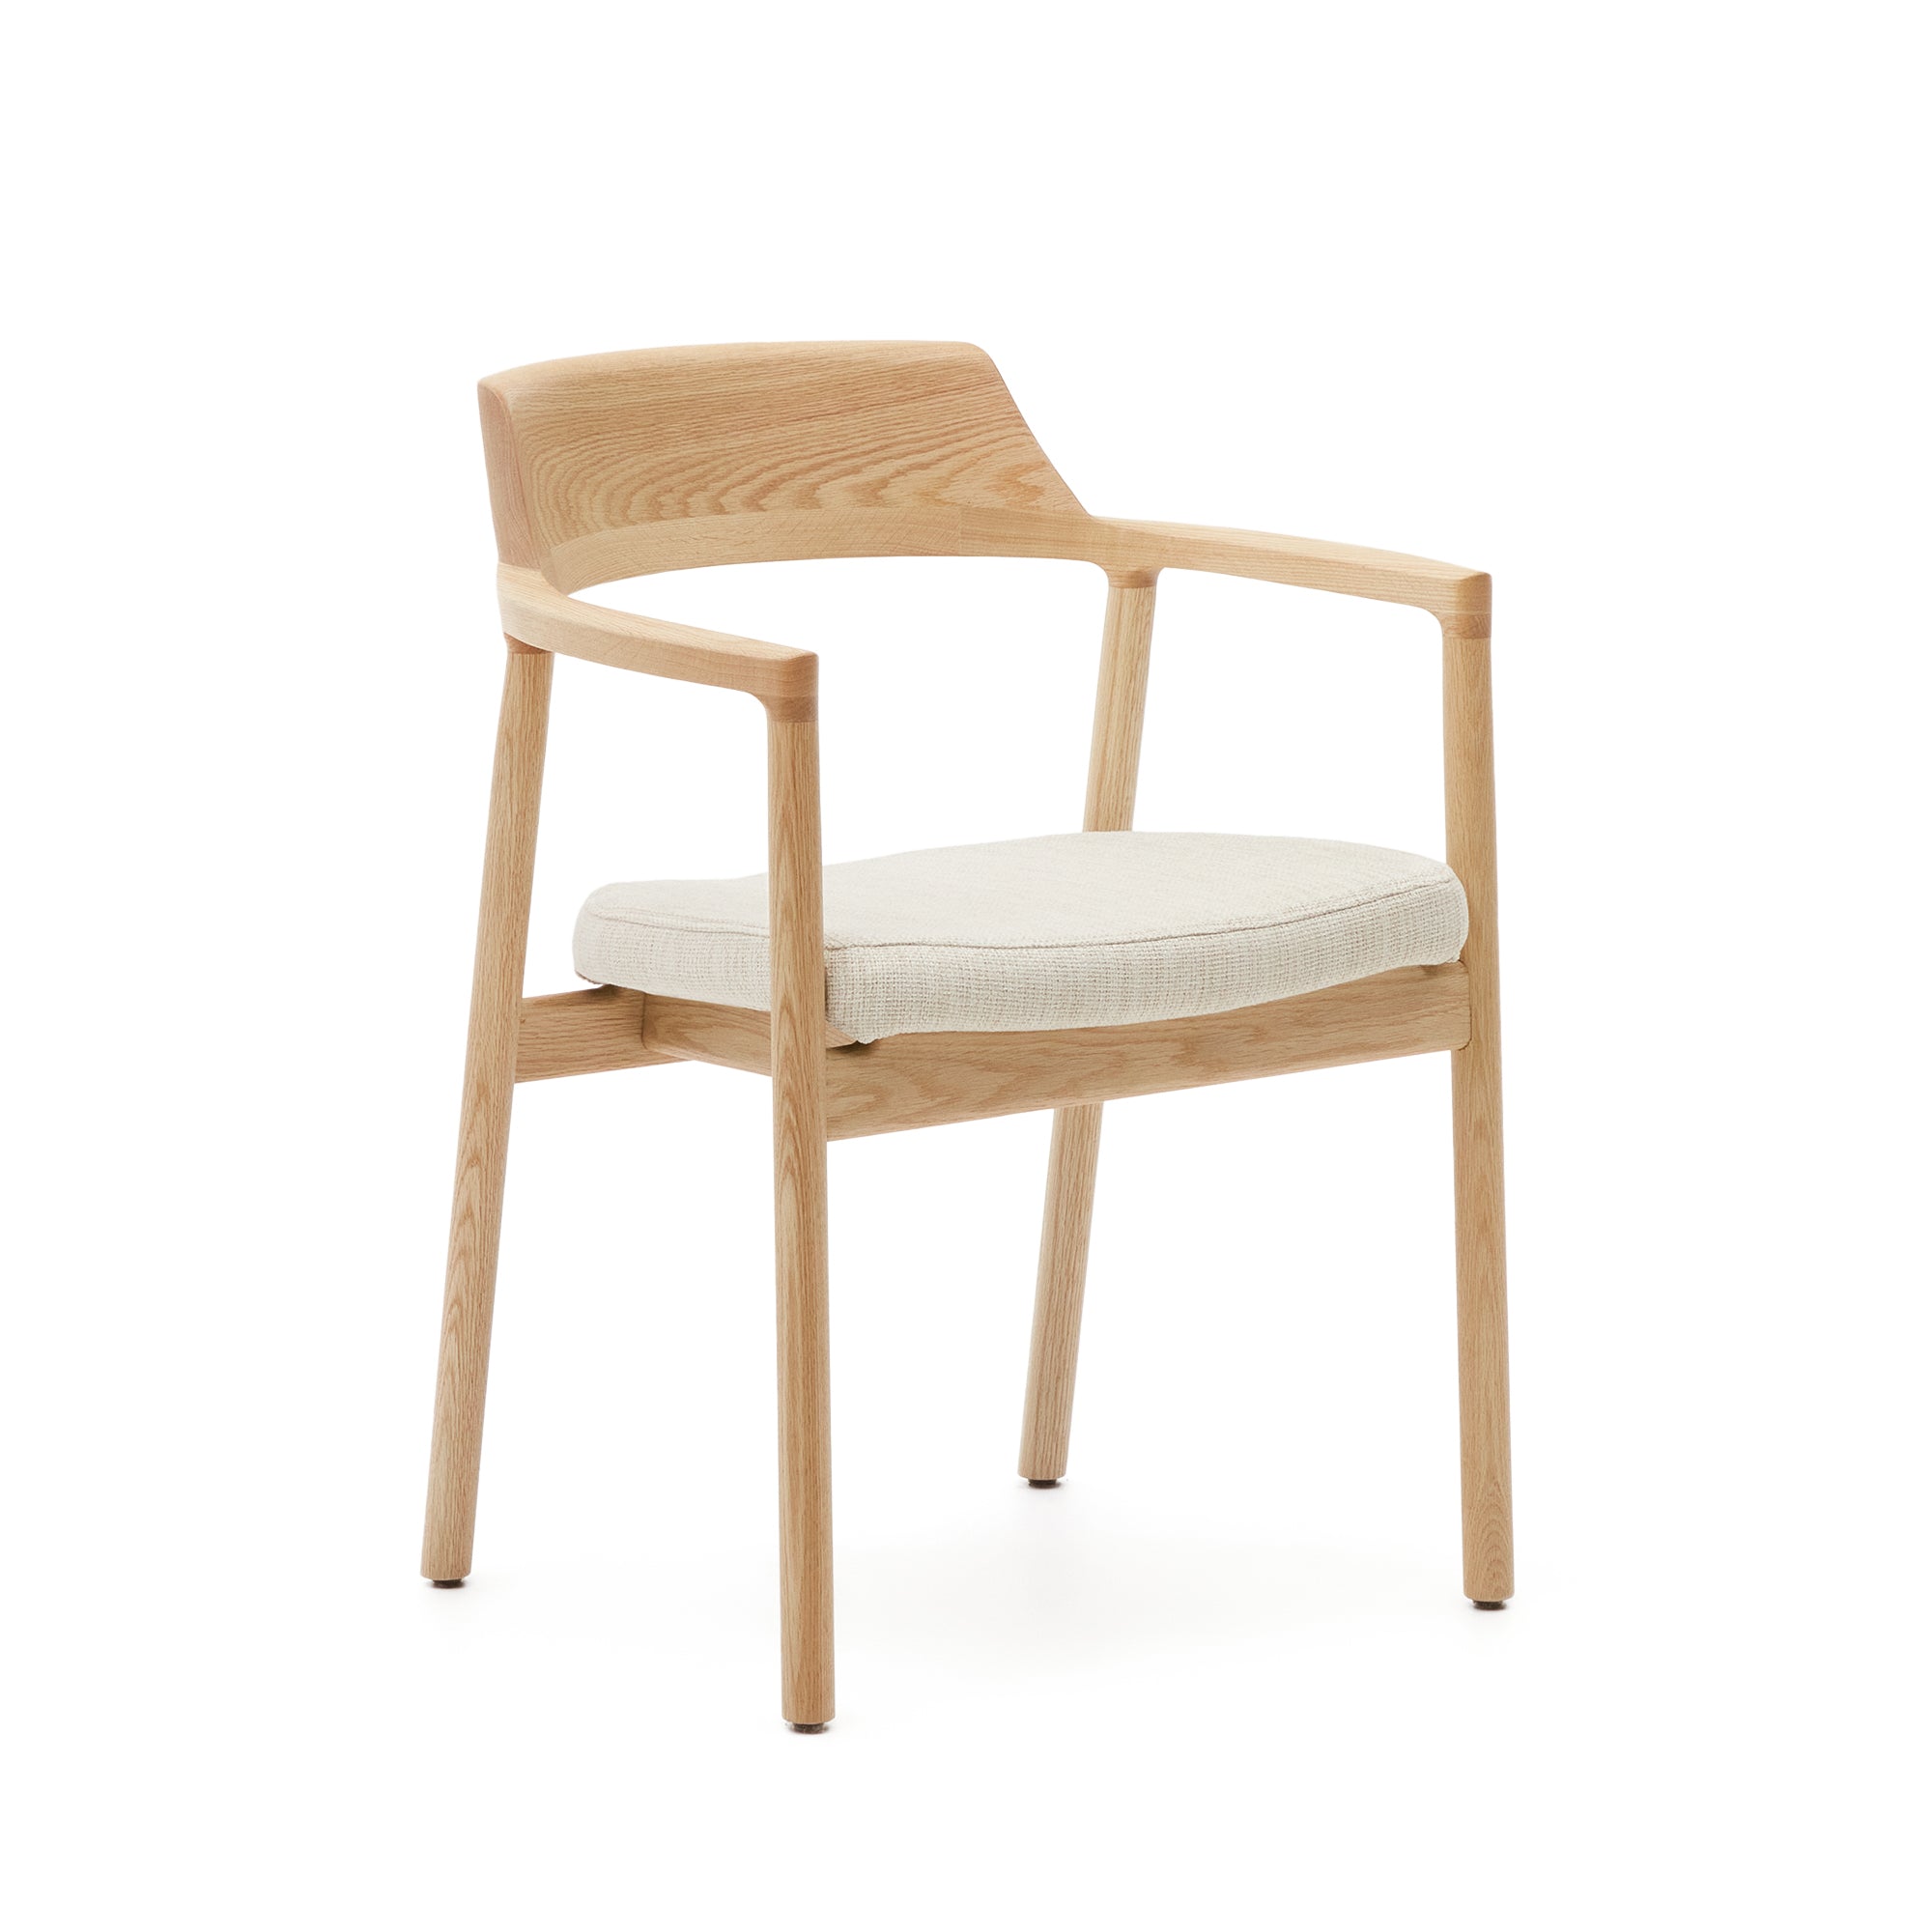 Low chair with removable cover beige chenille, solid oak wood with natural finish FSC Mix Credit